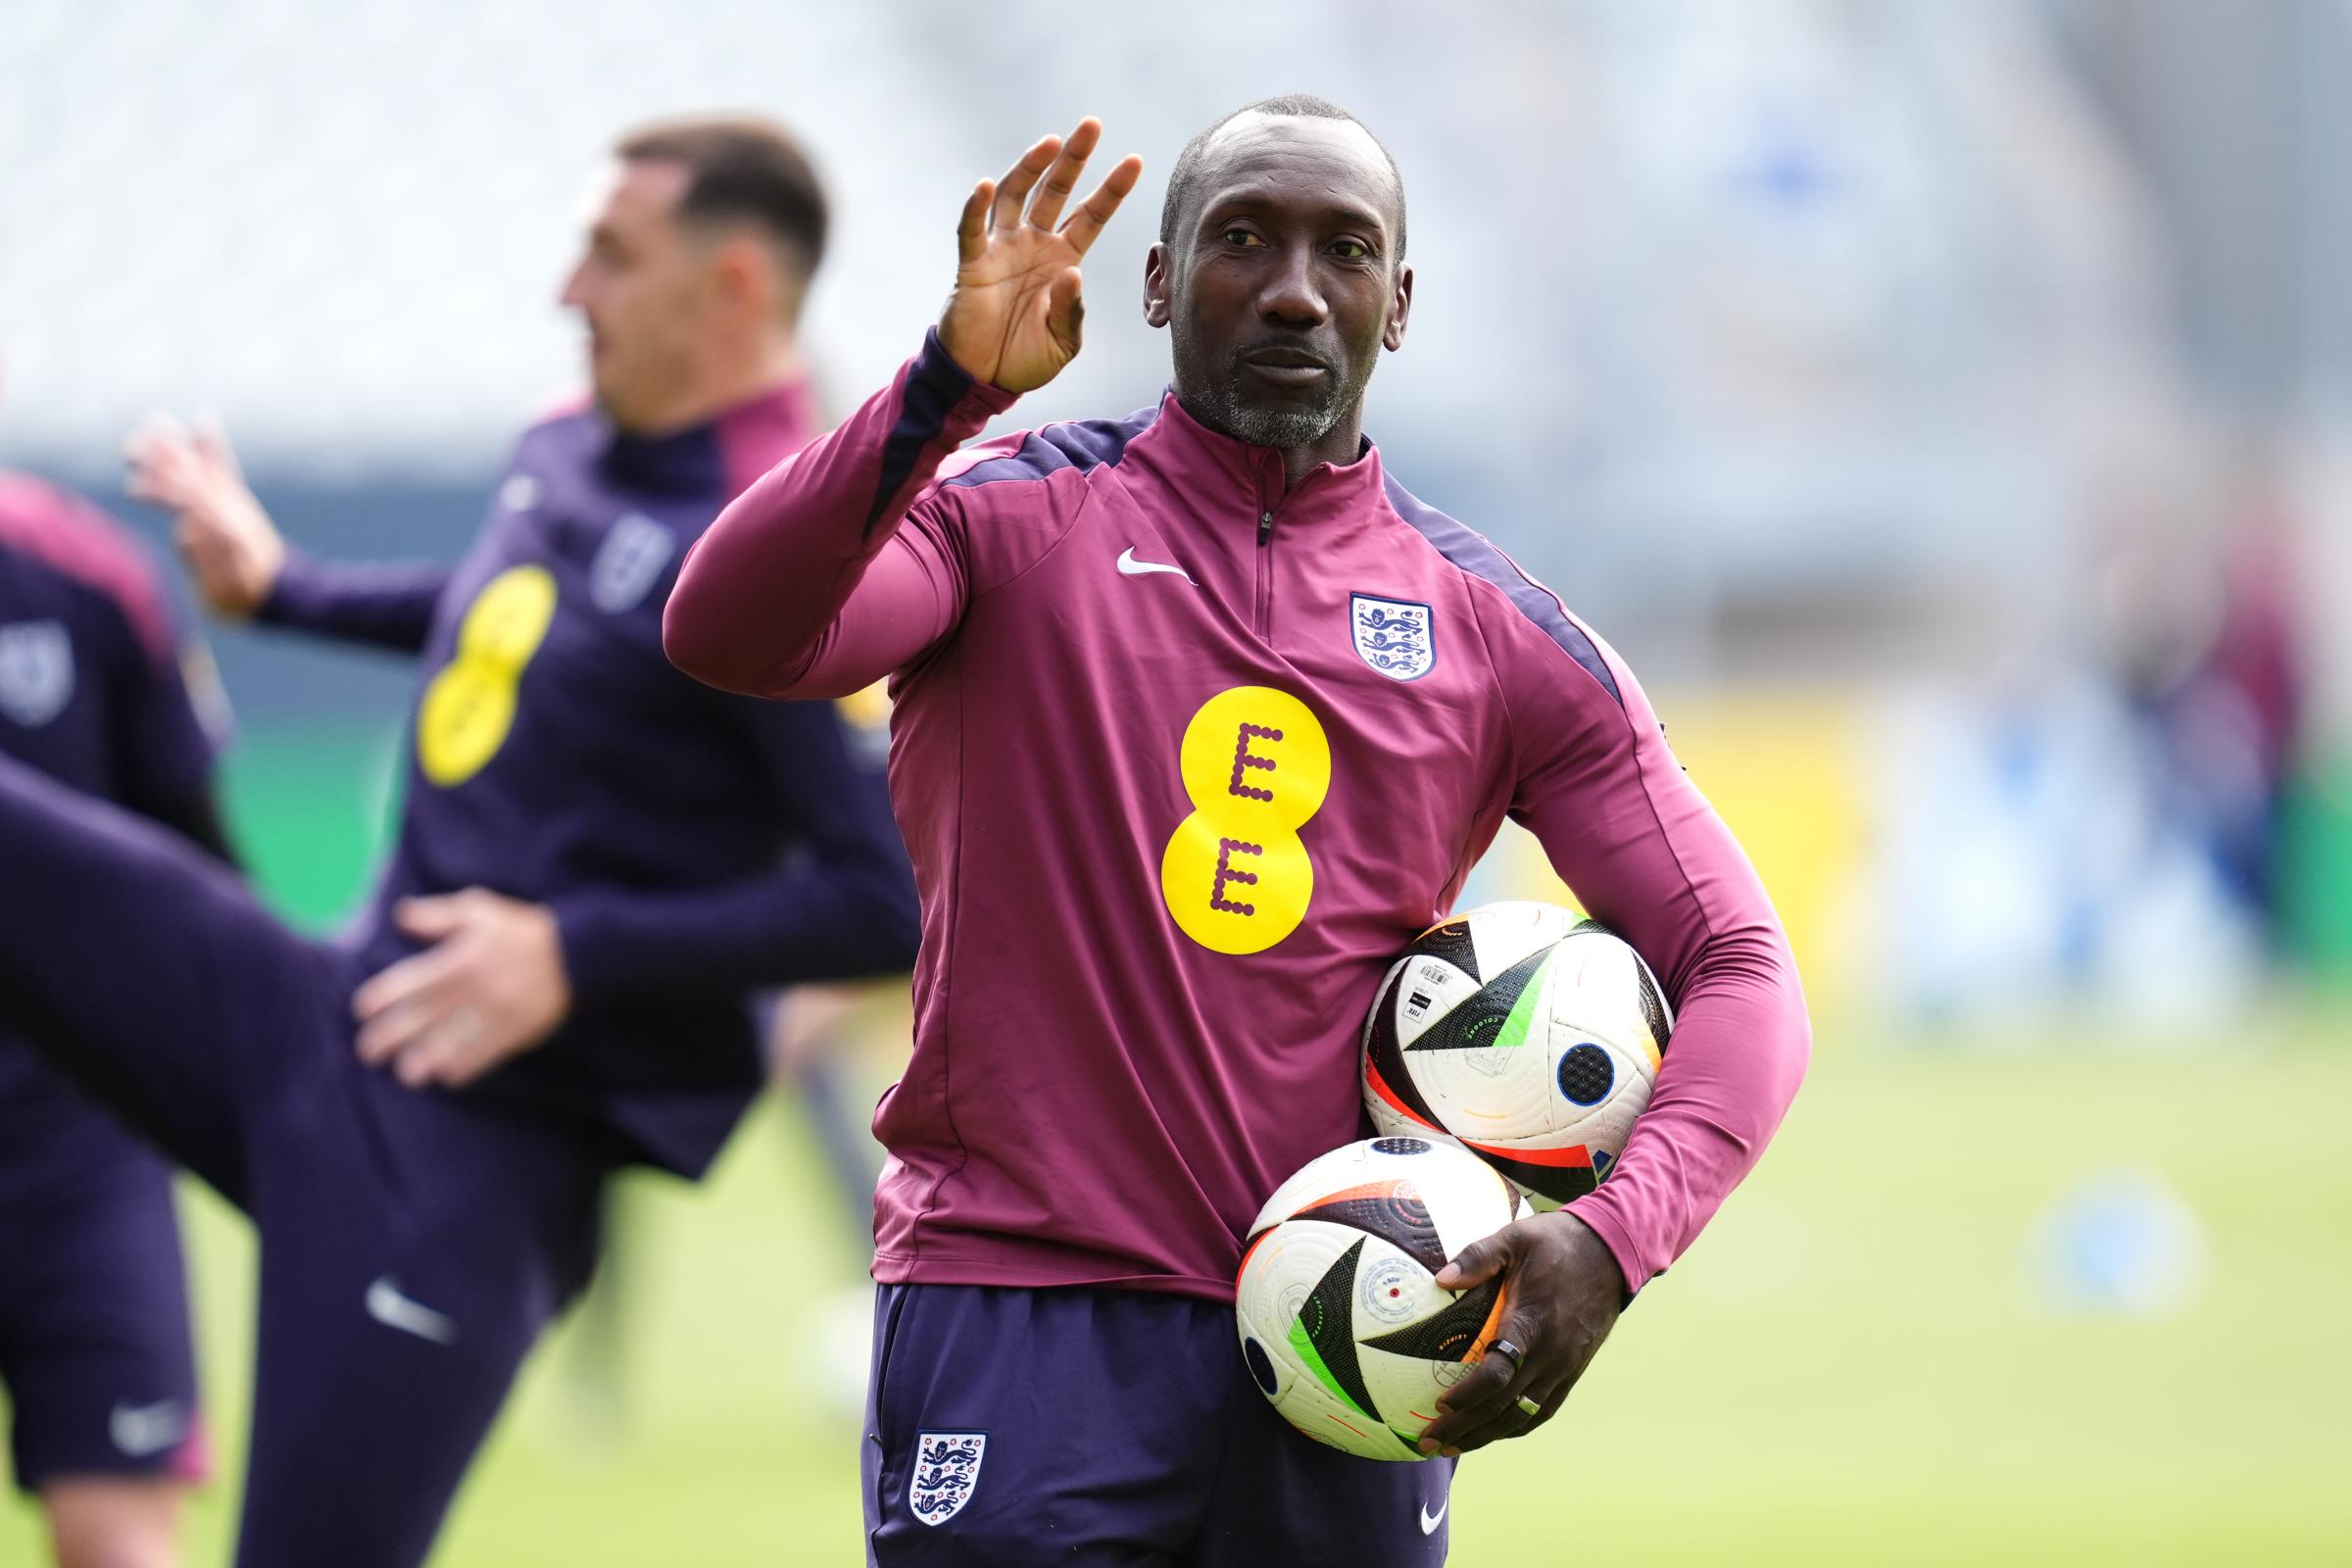 Jimmy-Floyd Hasselbaink was key to England penalty success at Euros